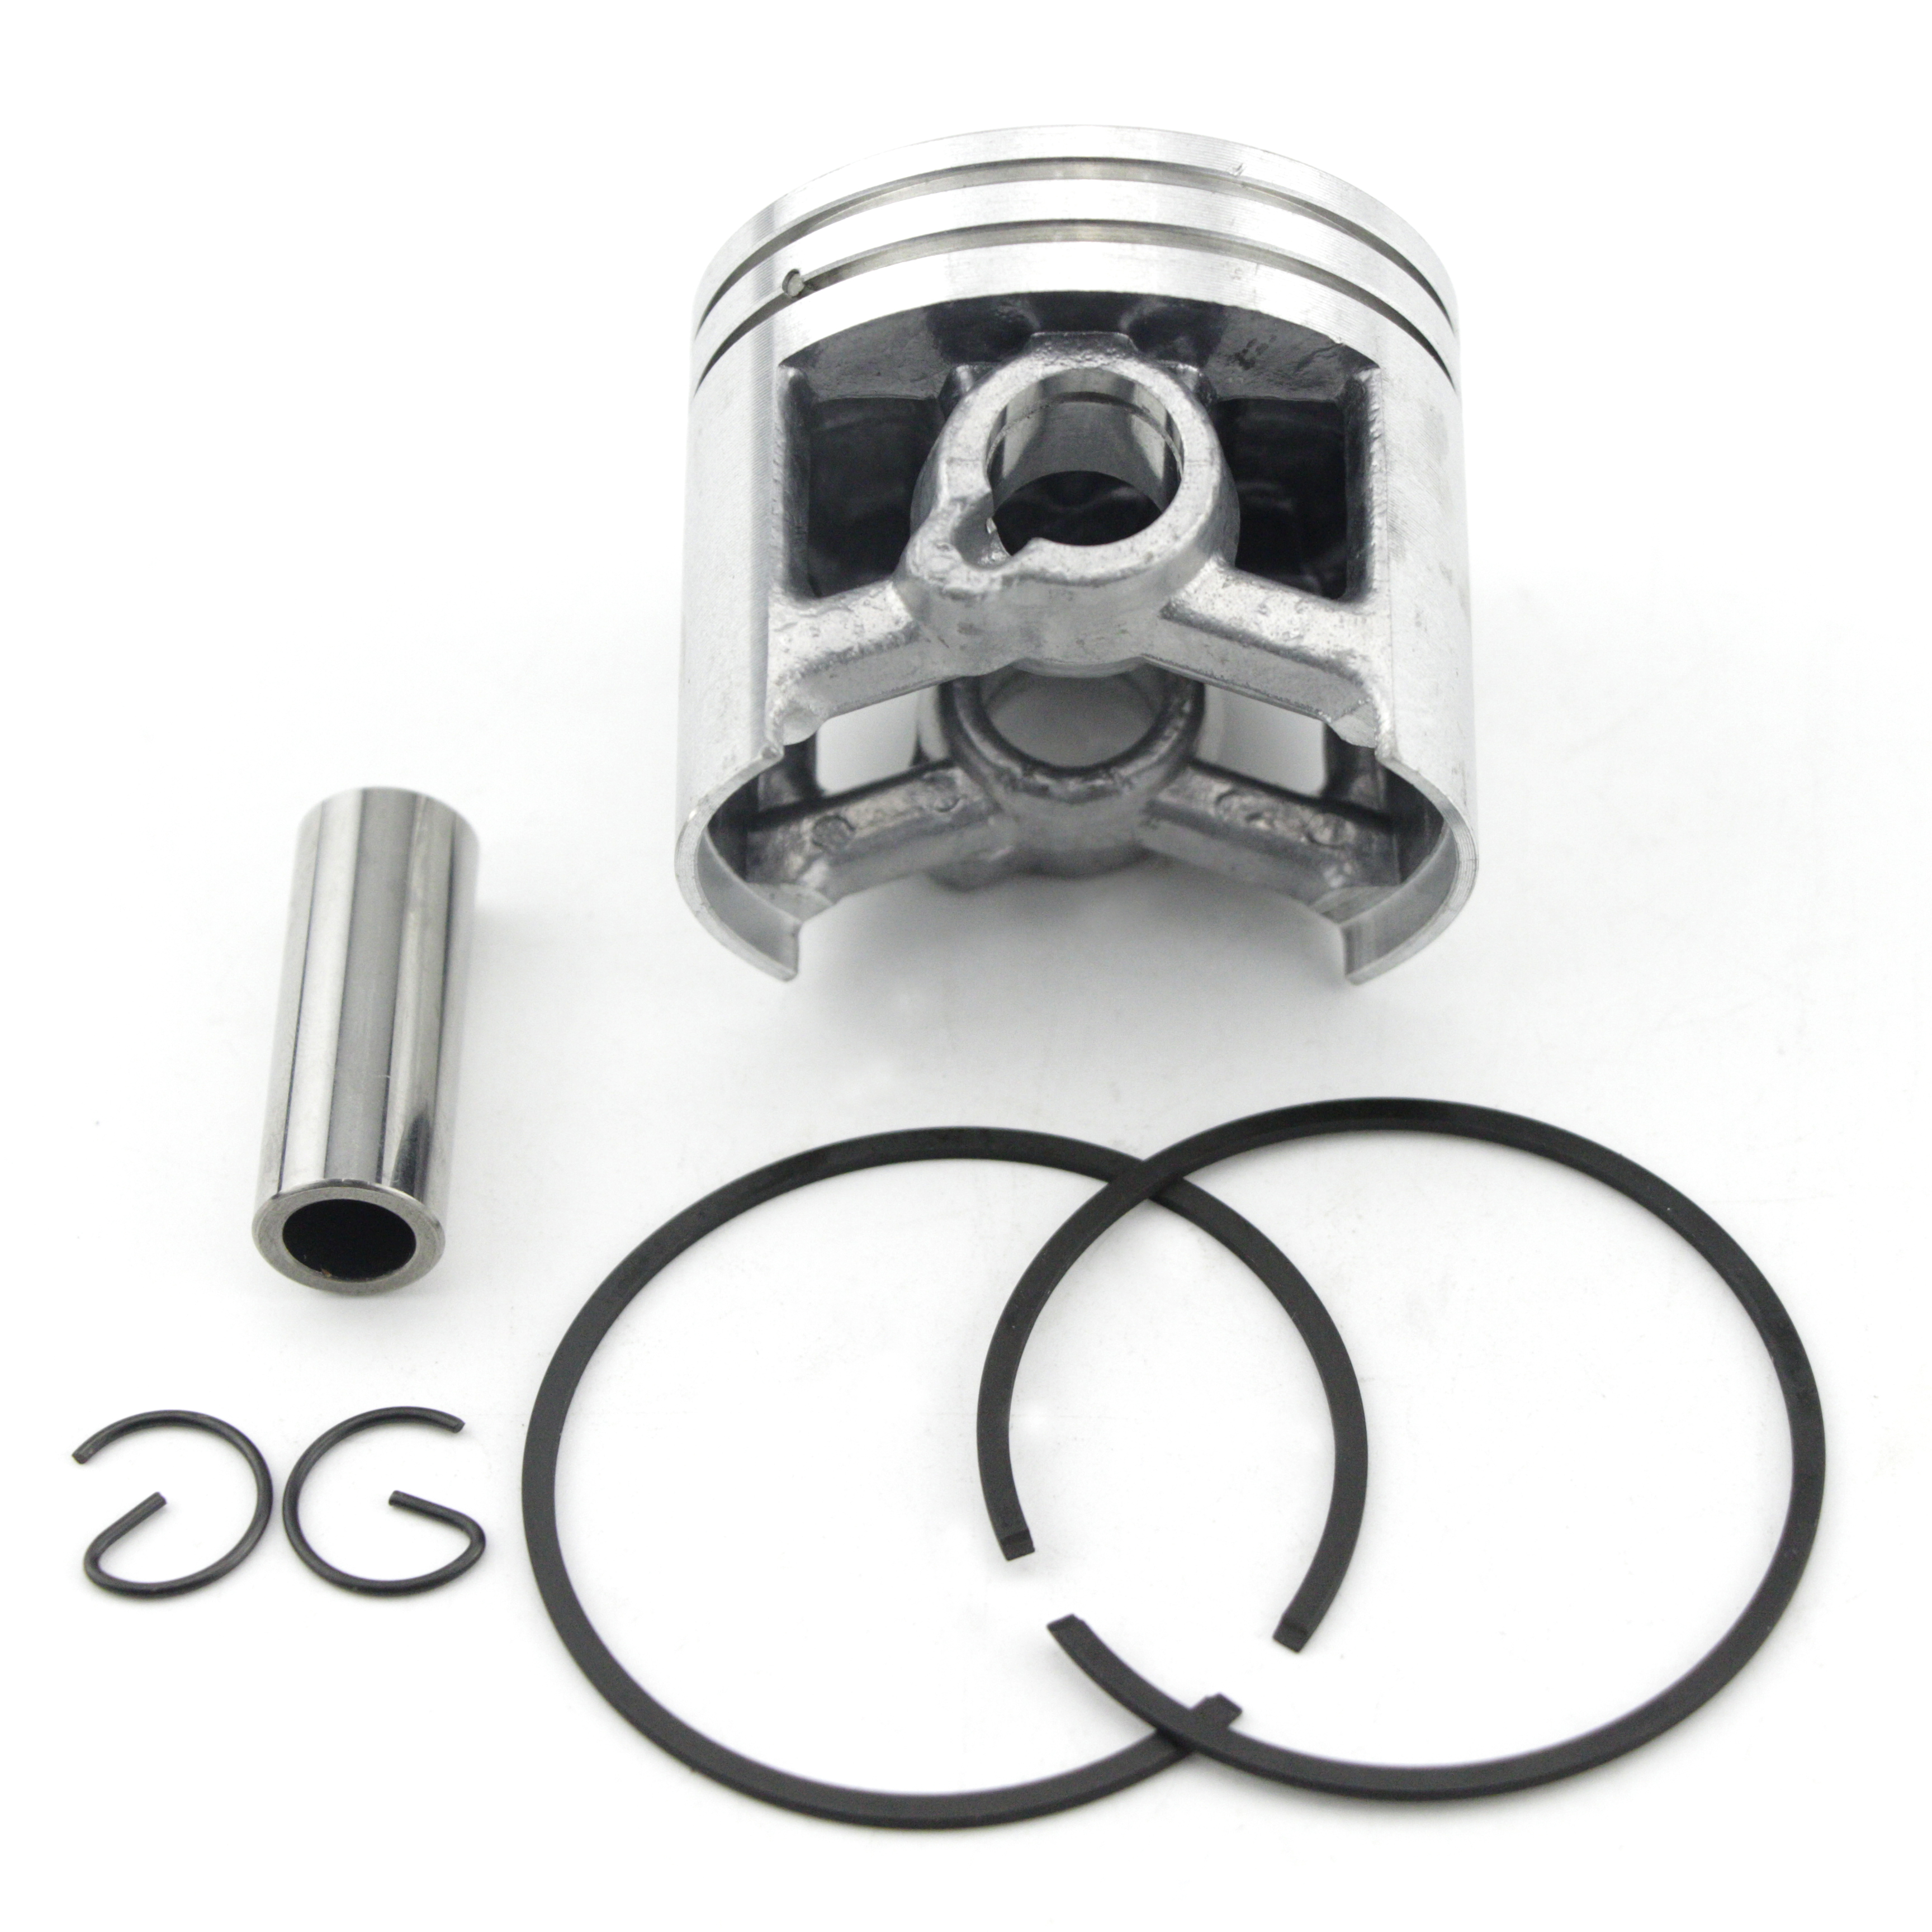 Aftermarket Stihl 044 MS440 Chainsaw 50MM Piston Kit With Ring Oem 1128 030 2015